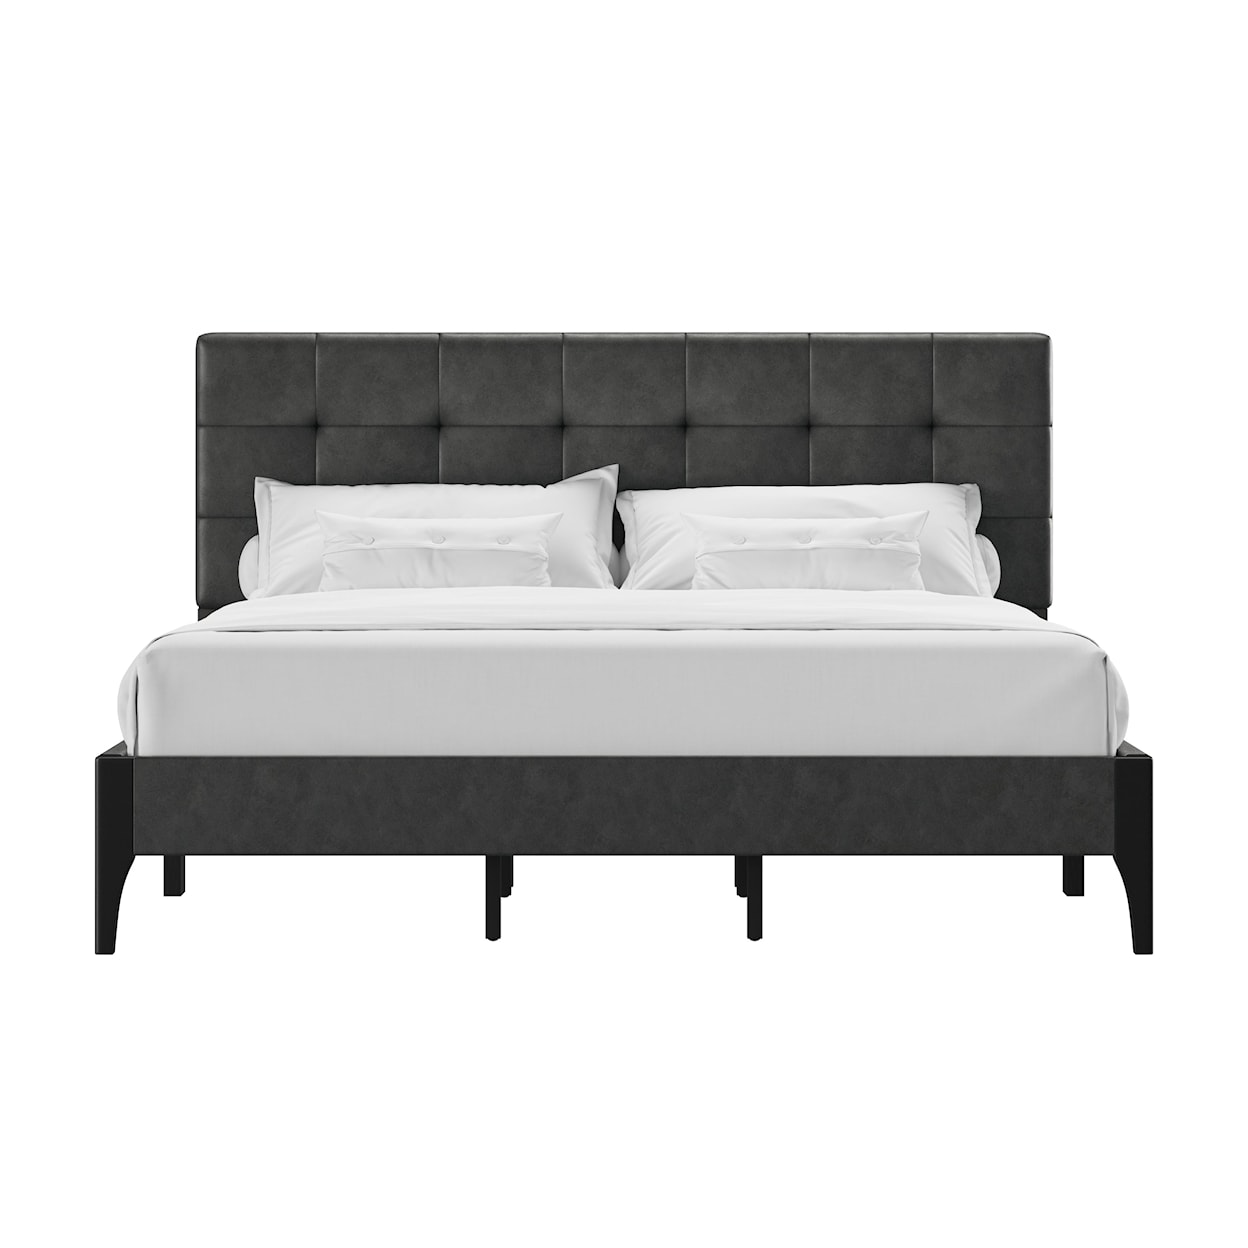 Hillsdale Beechbrook King Bed